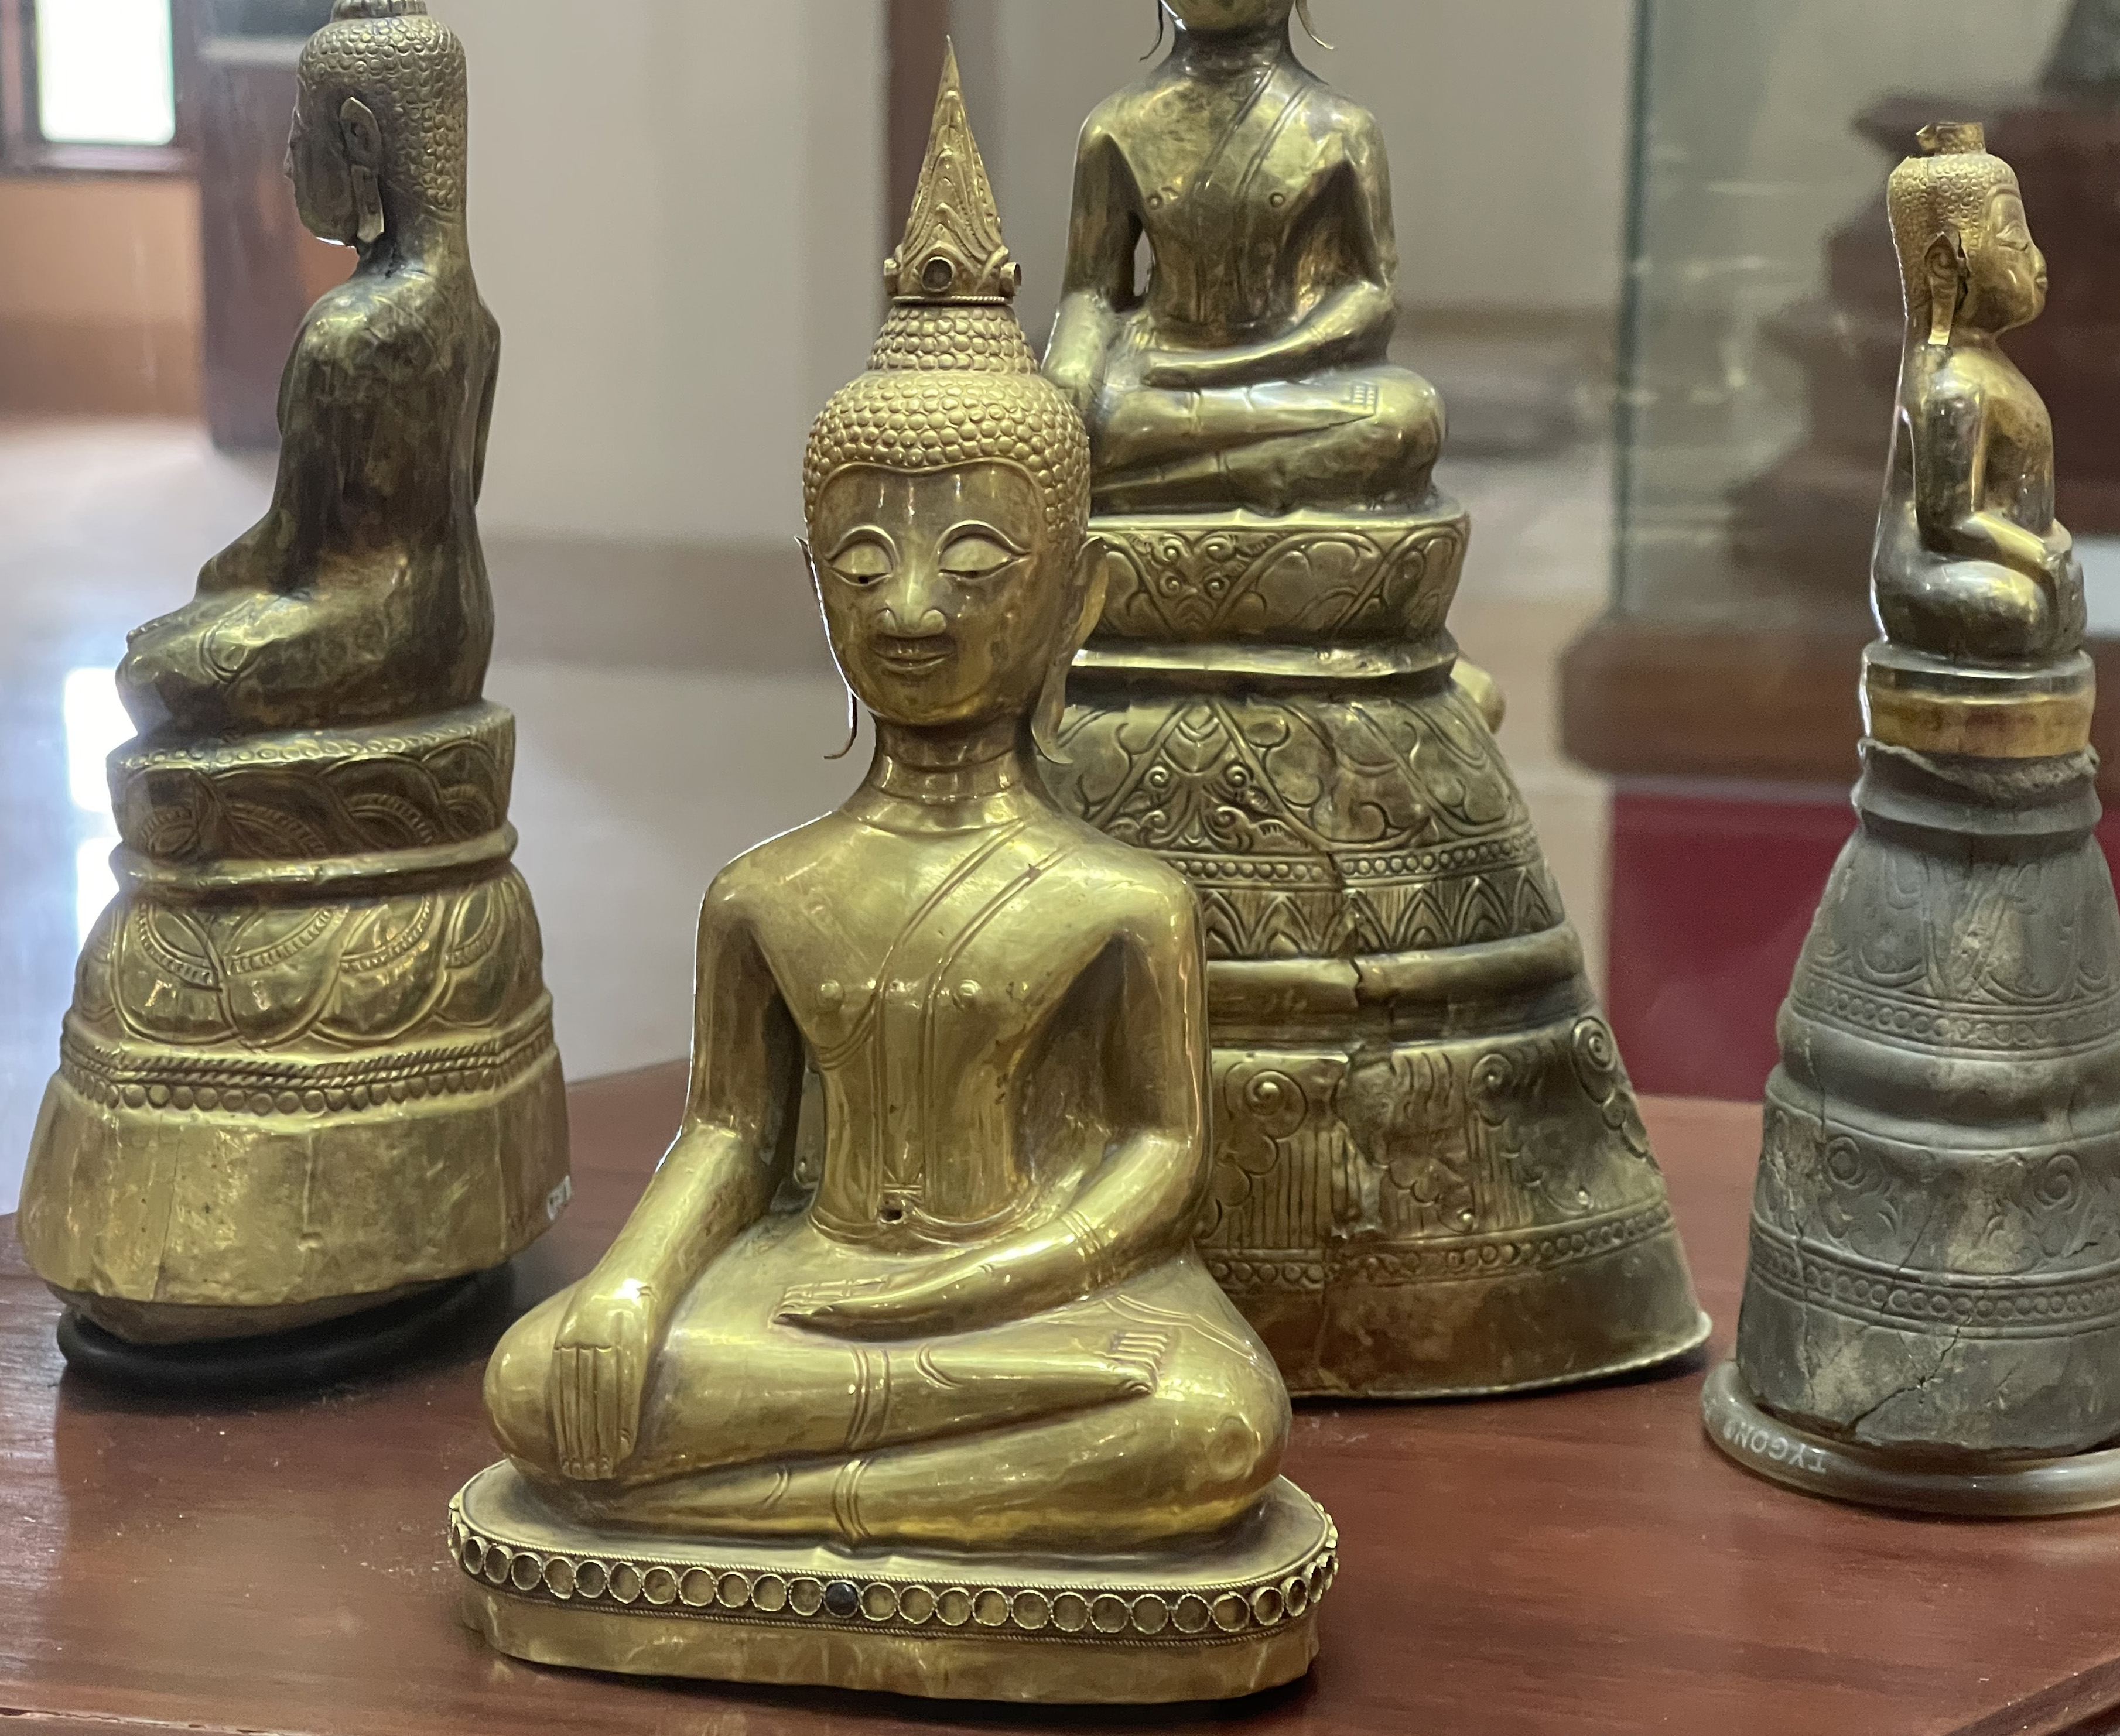 05 Buddha statues plated with gold